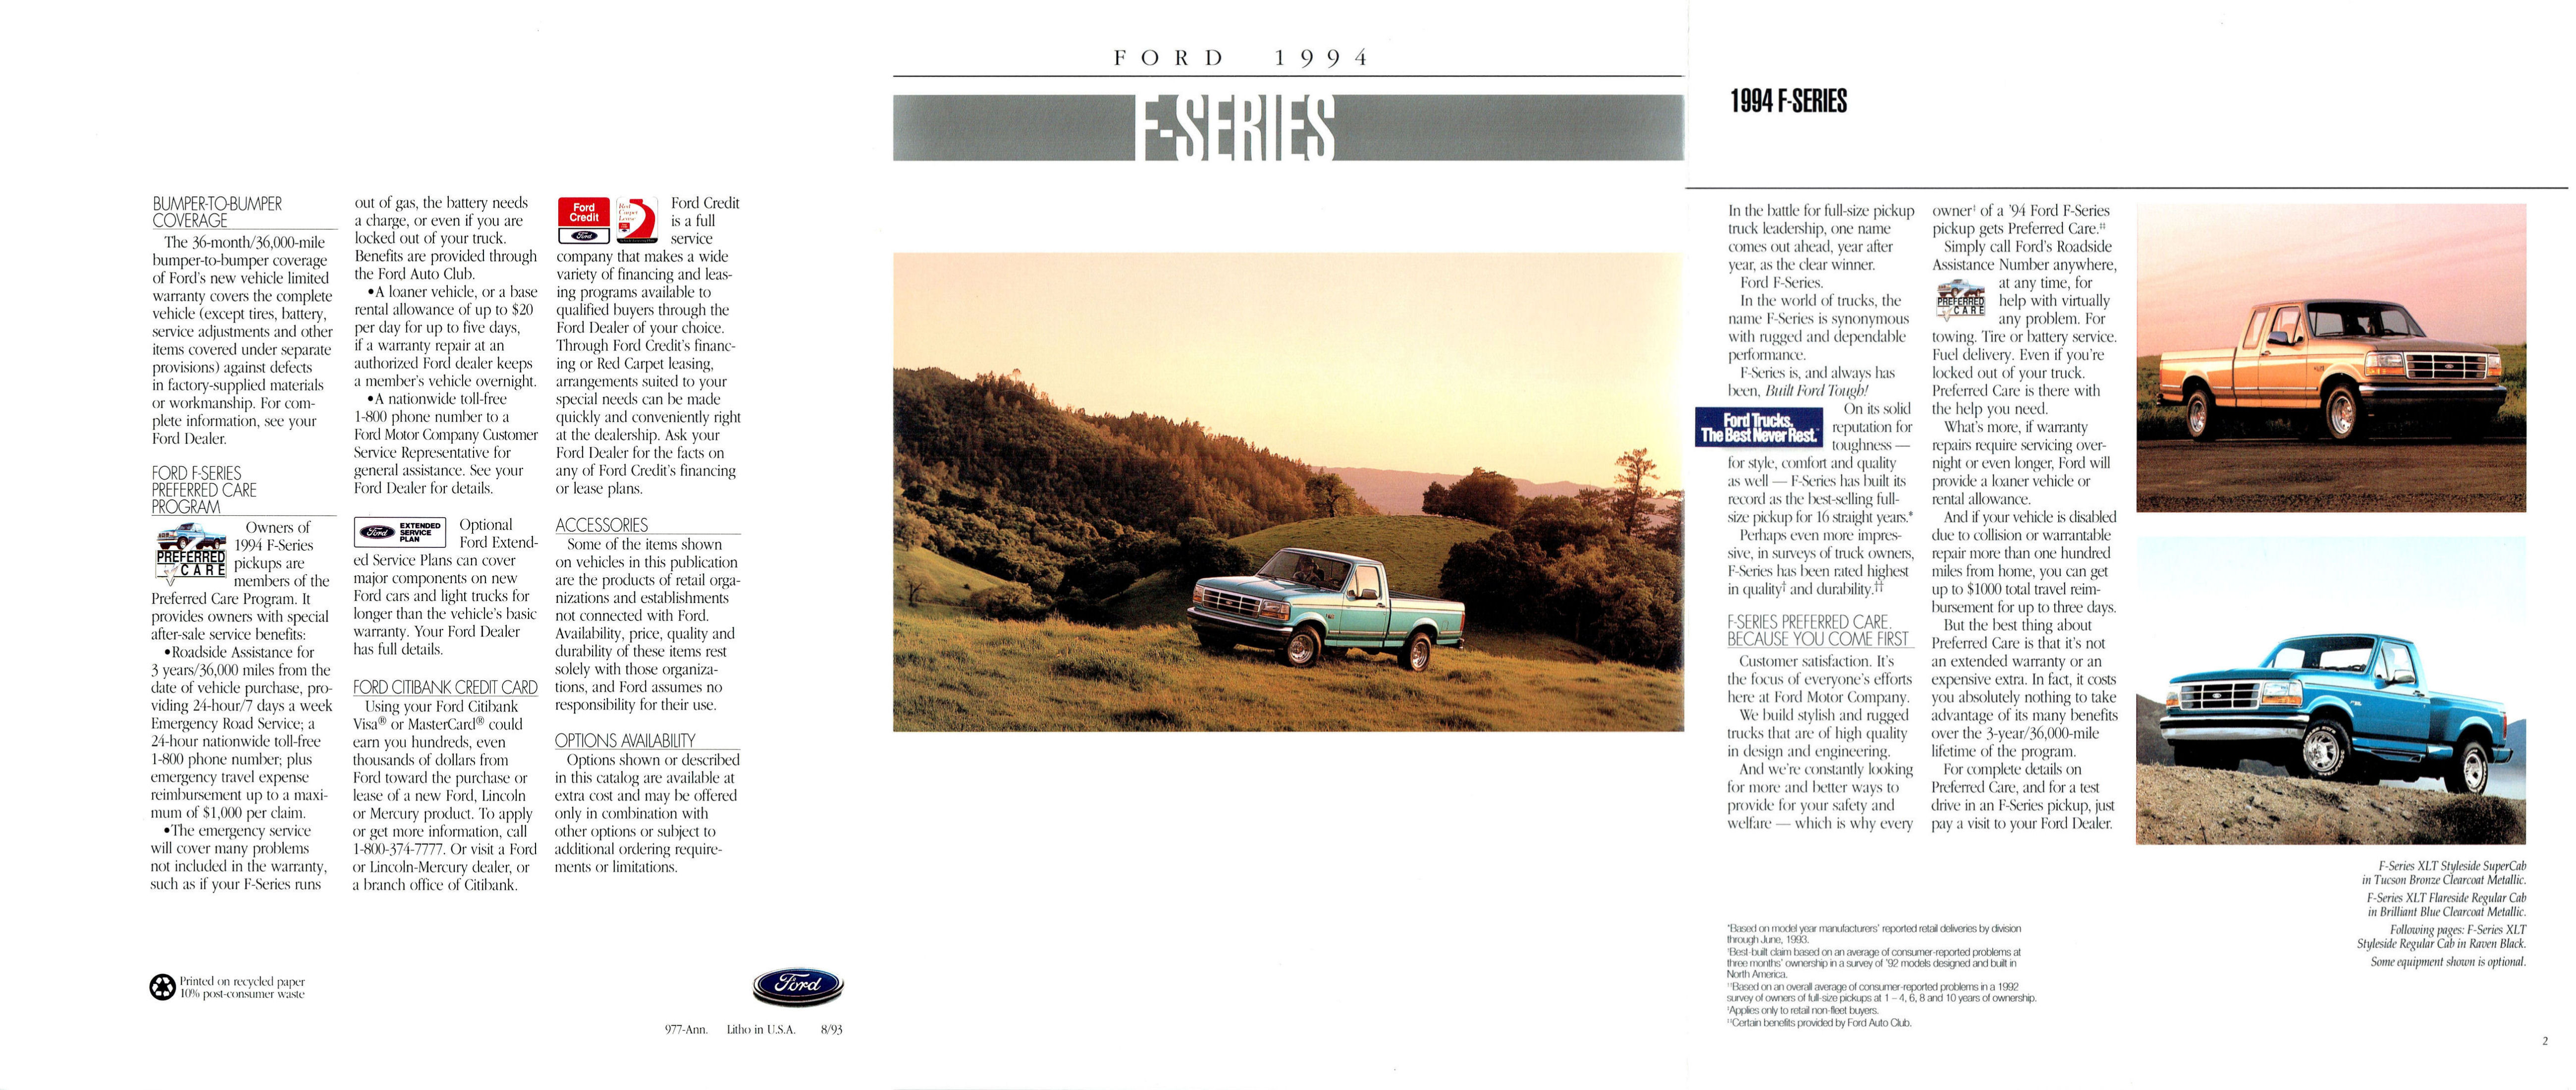 1994 Ford F Series-20-01-02